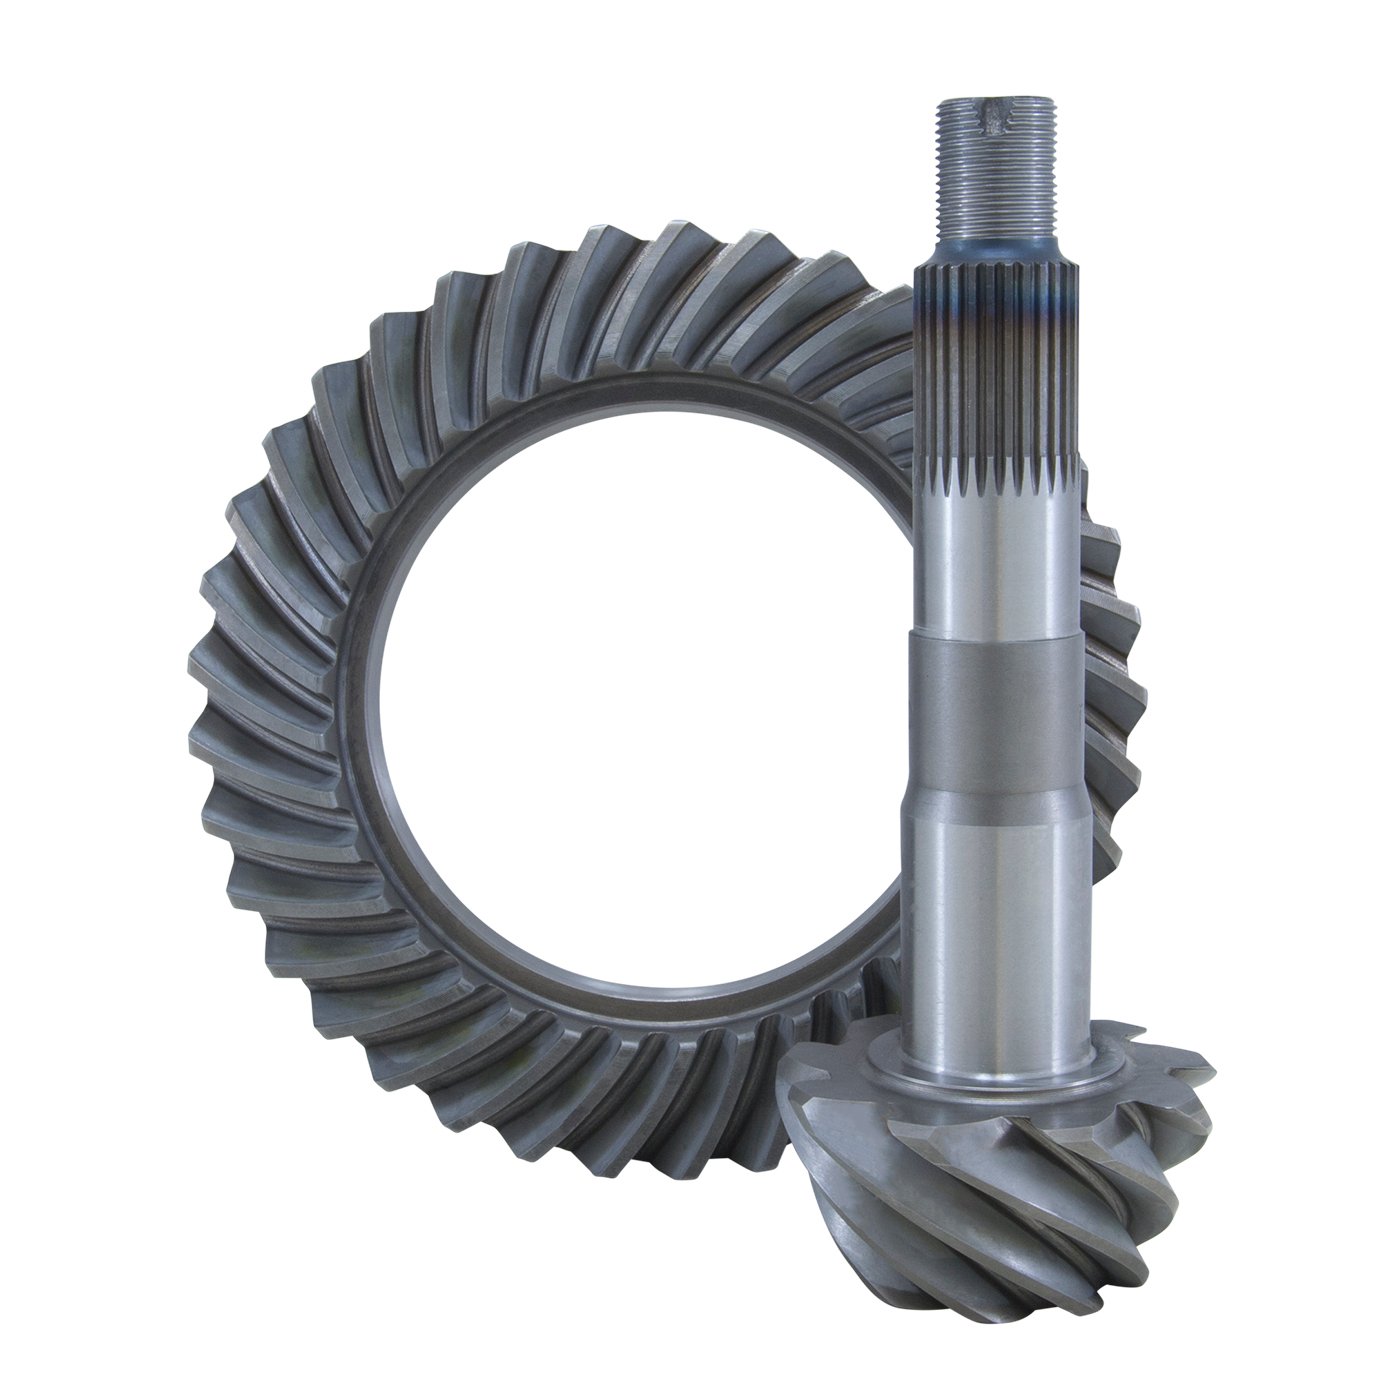 High Performance Ring & Pinion Gear Set For Toyota V6 In A 4.88 Ratio